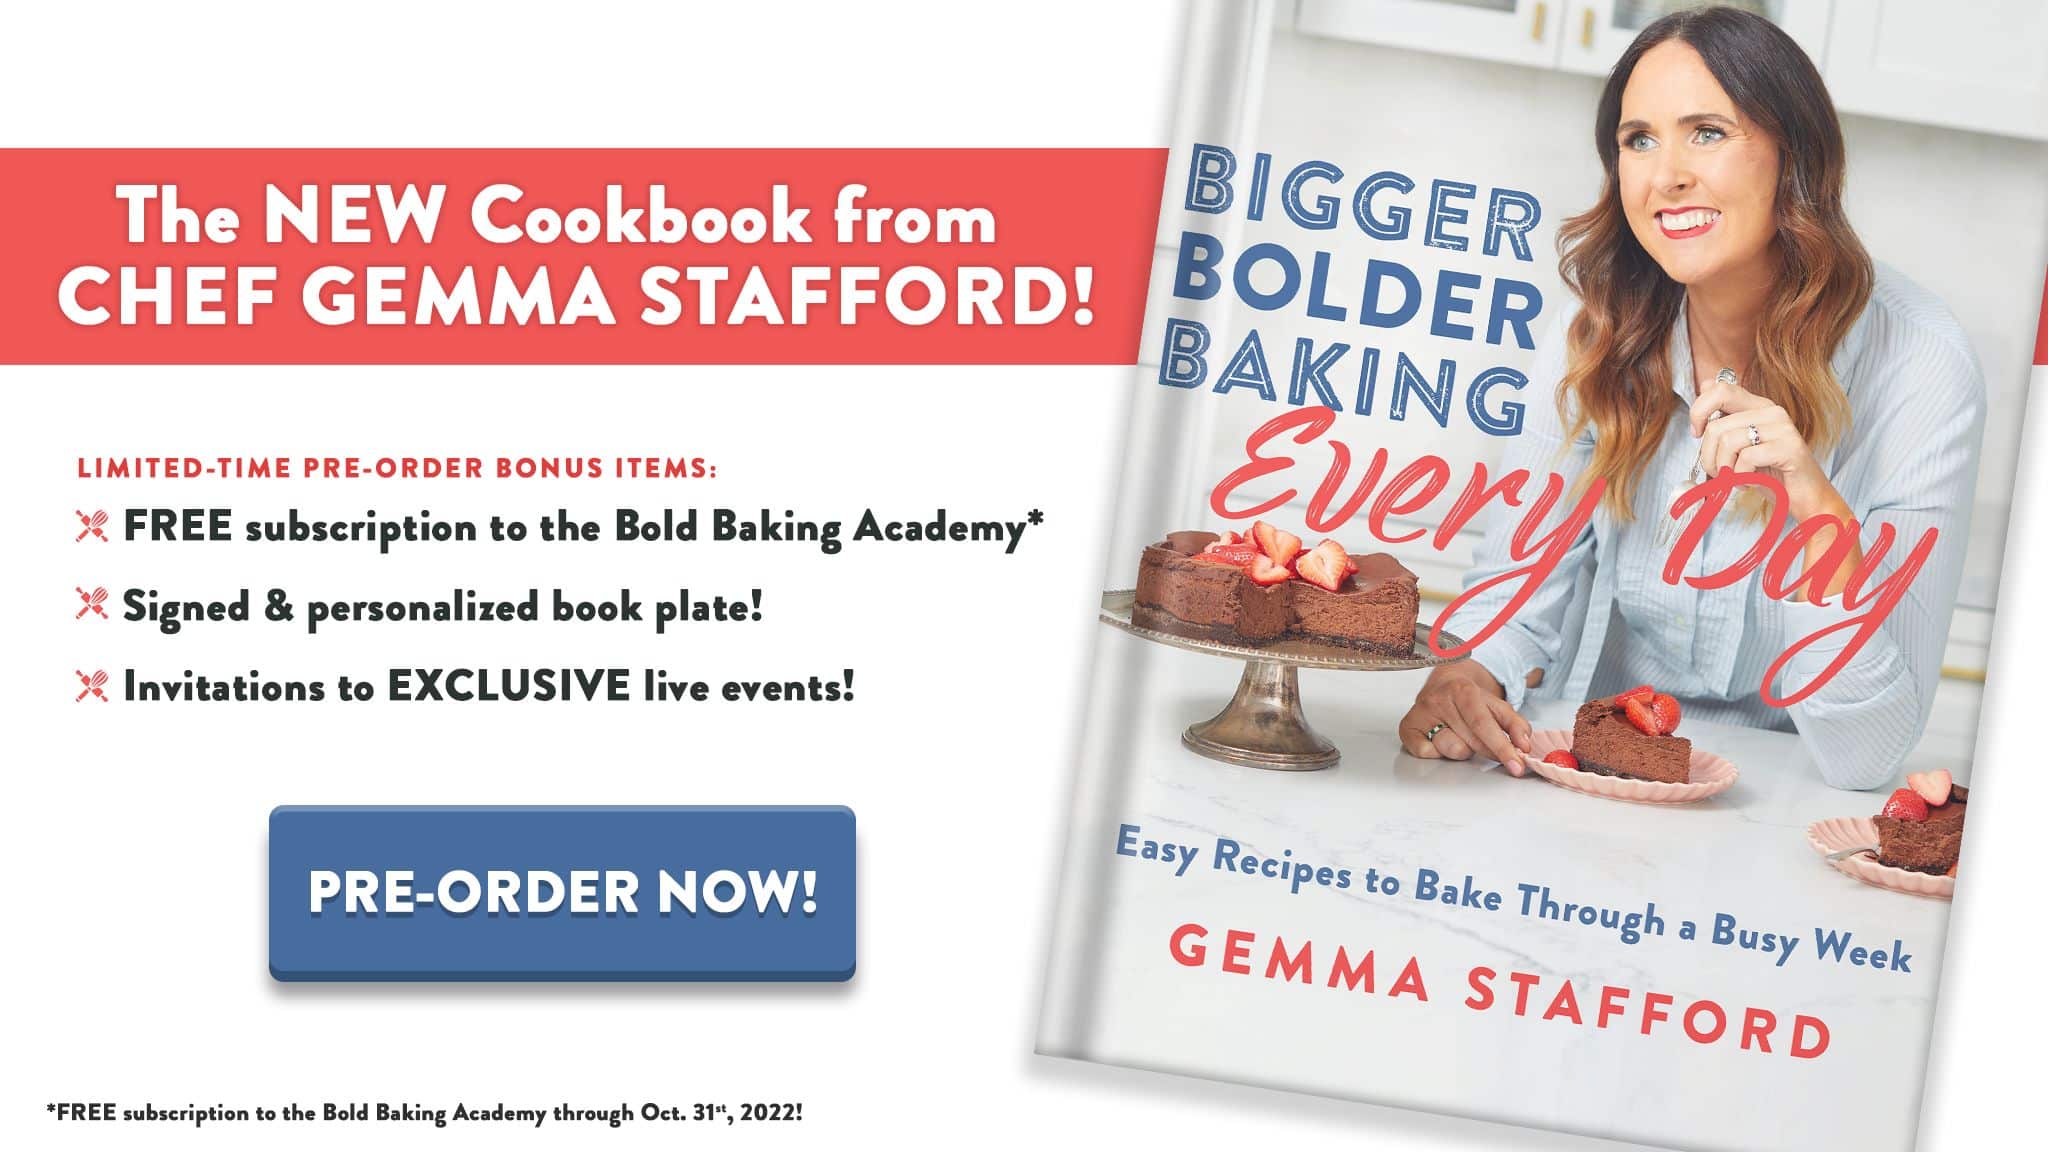 Banner for my new cookbook, Bigger Bolder Baking Every Day. Click the image to pre-order now!